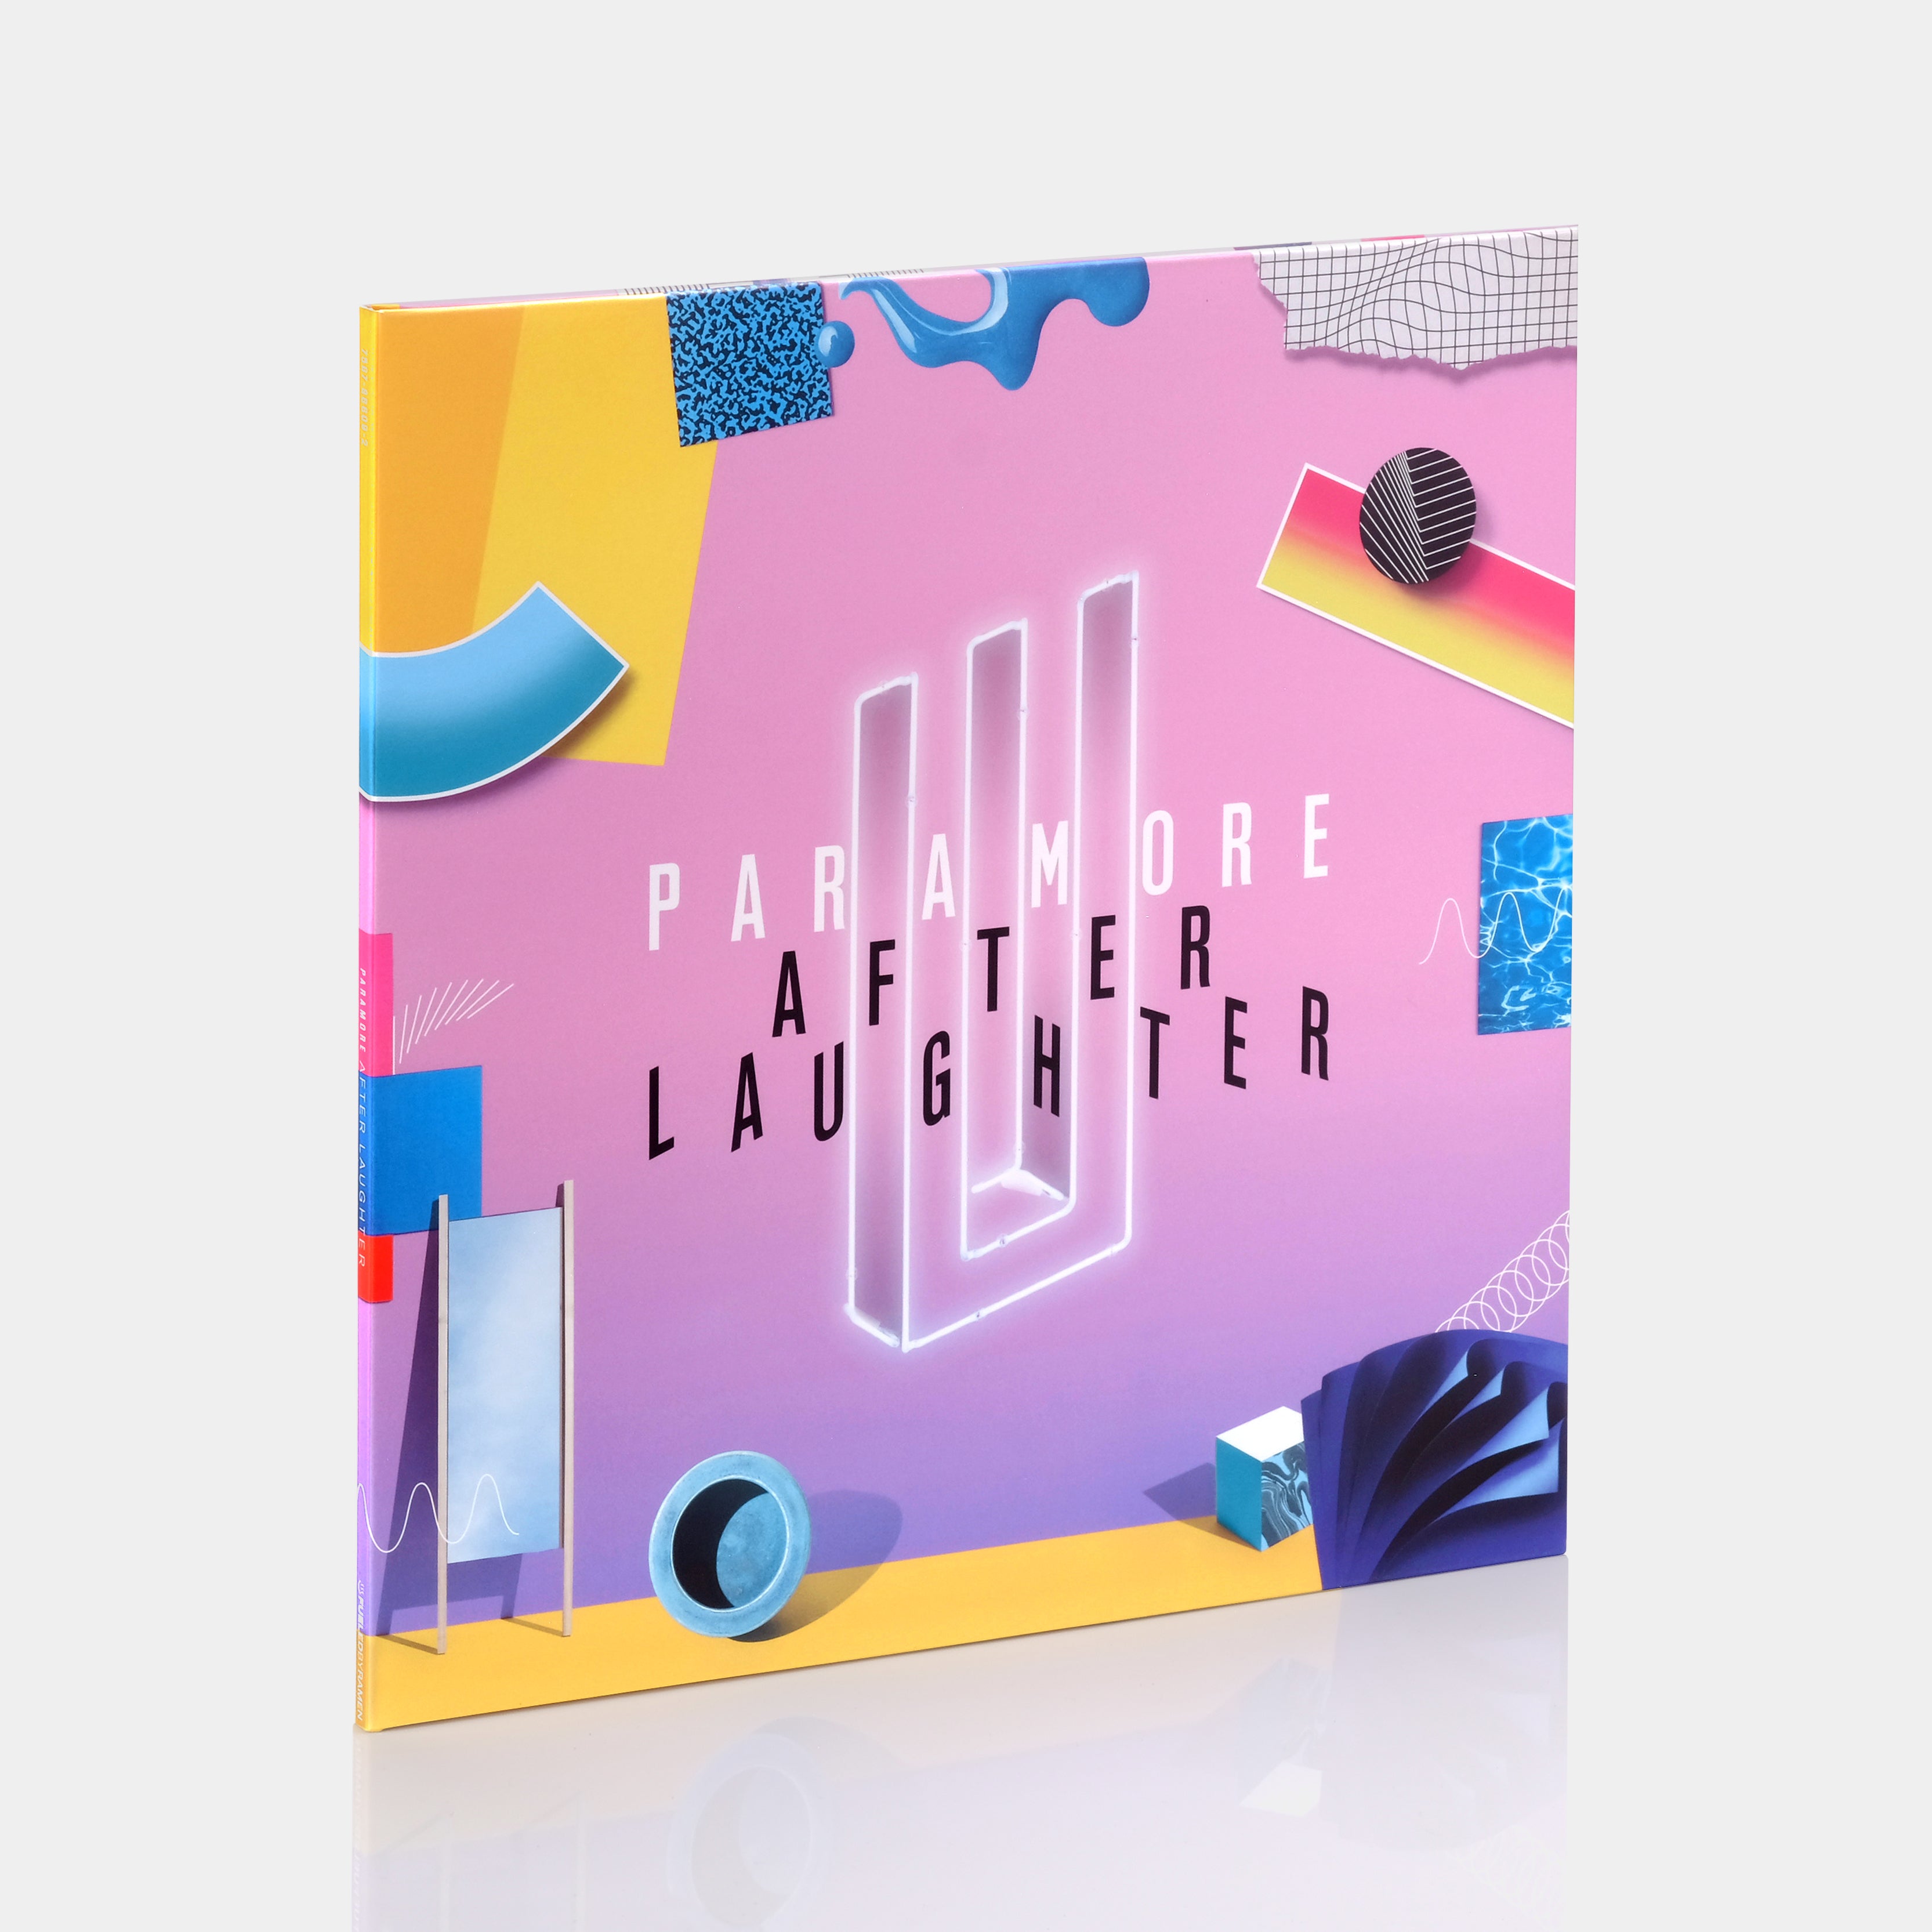 Paramore - After Laughter LP Black And White Marble Vinyl Record